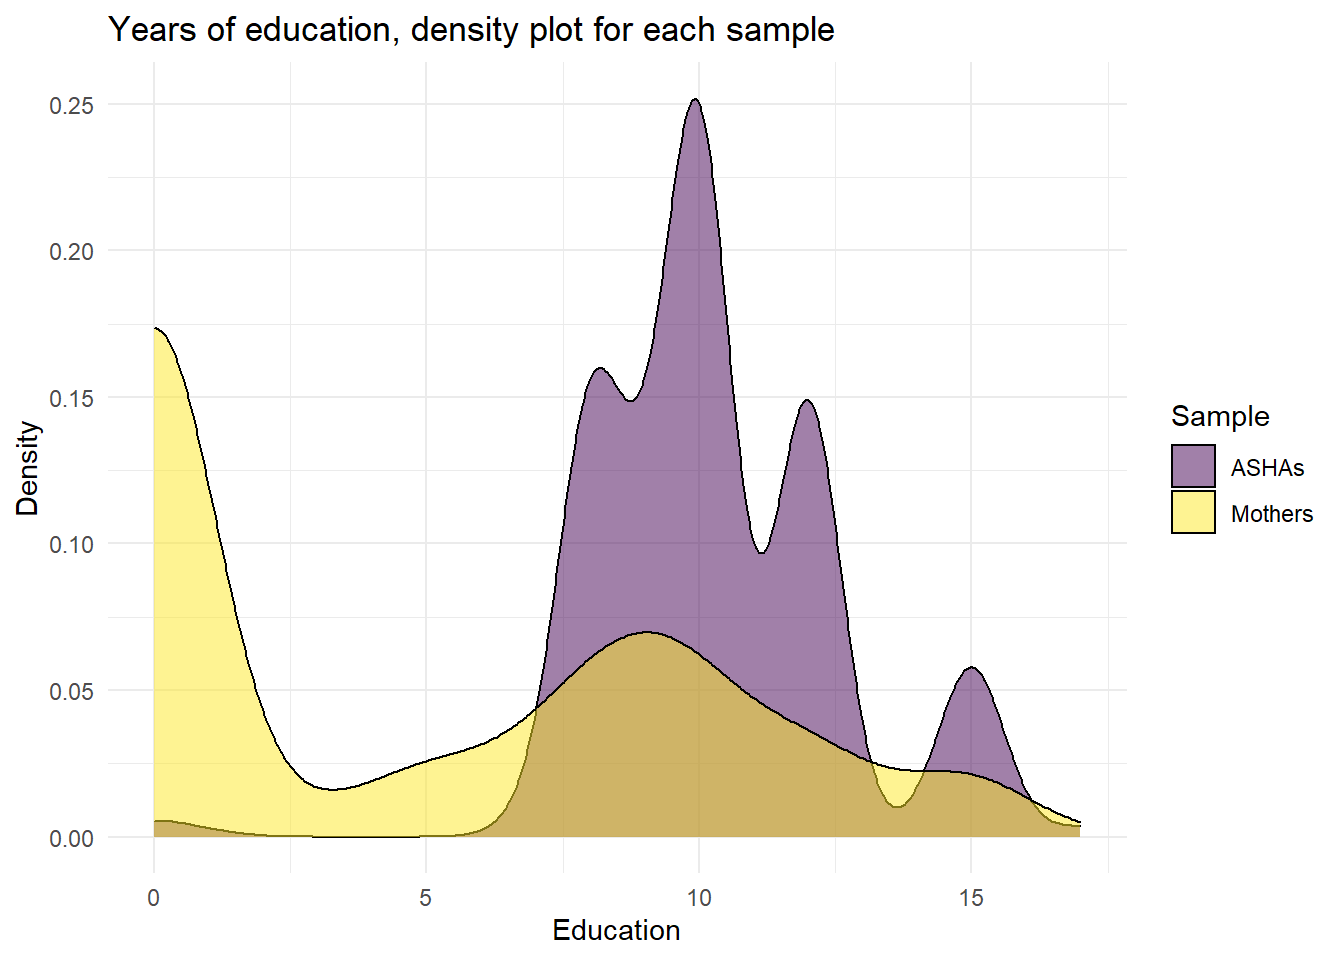 Years of self-reported education for each sample